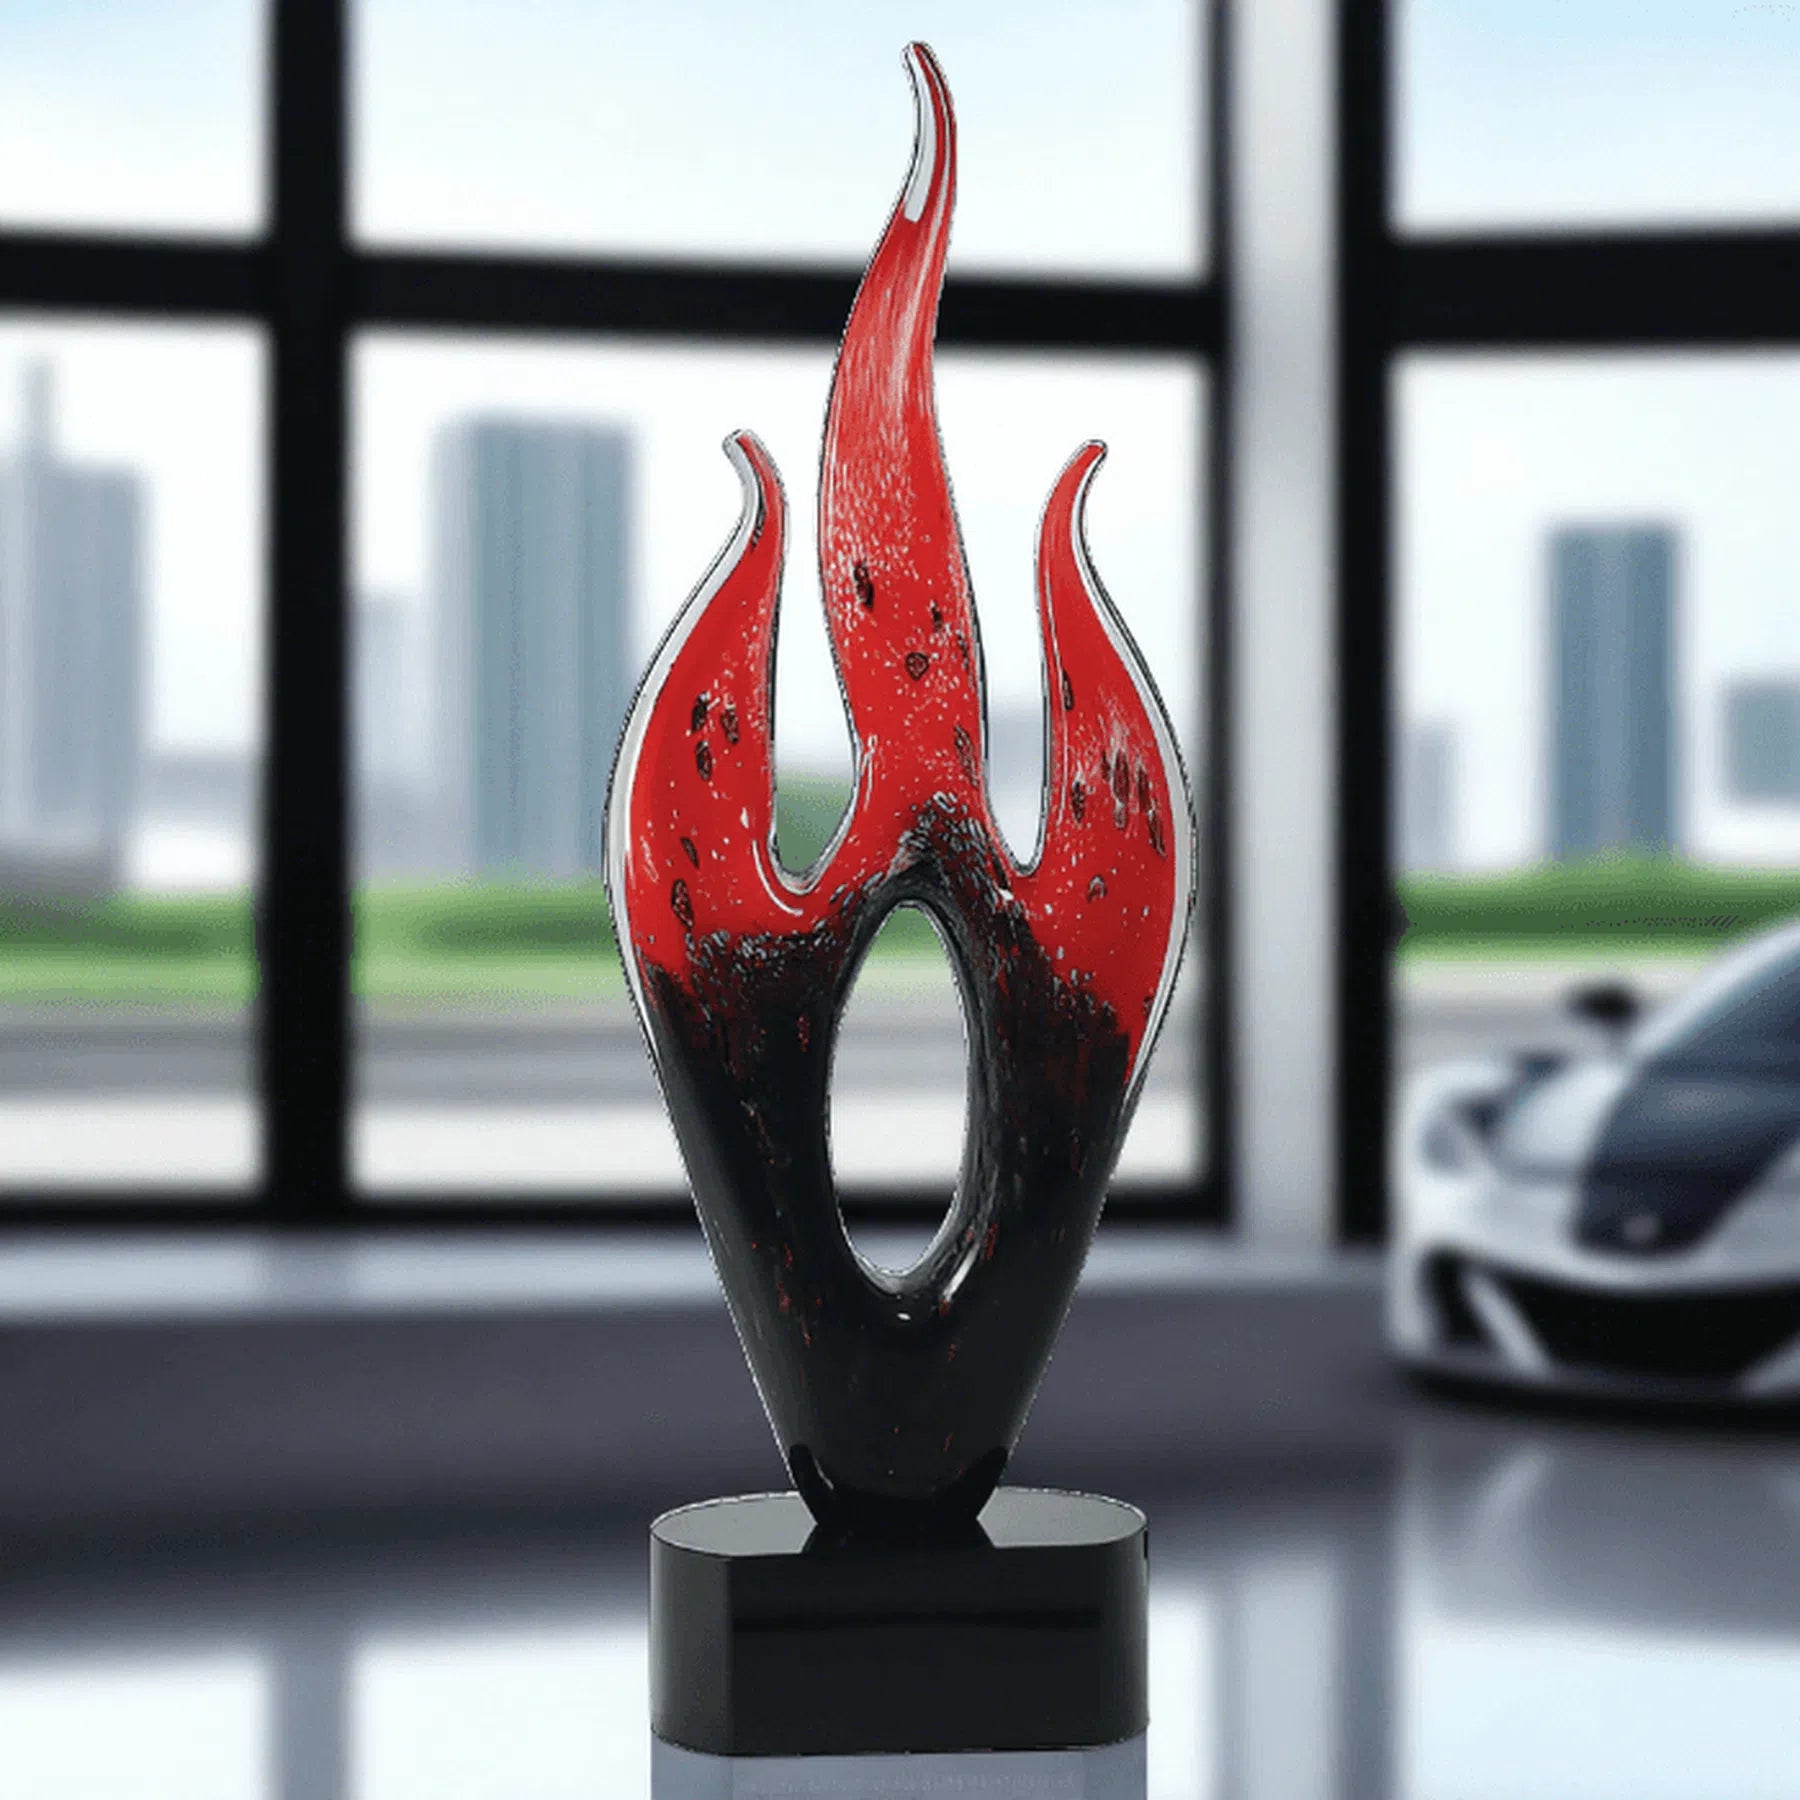 16" Red and Black Flame Art Glass Award Sculpture